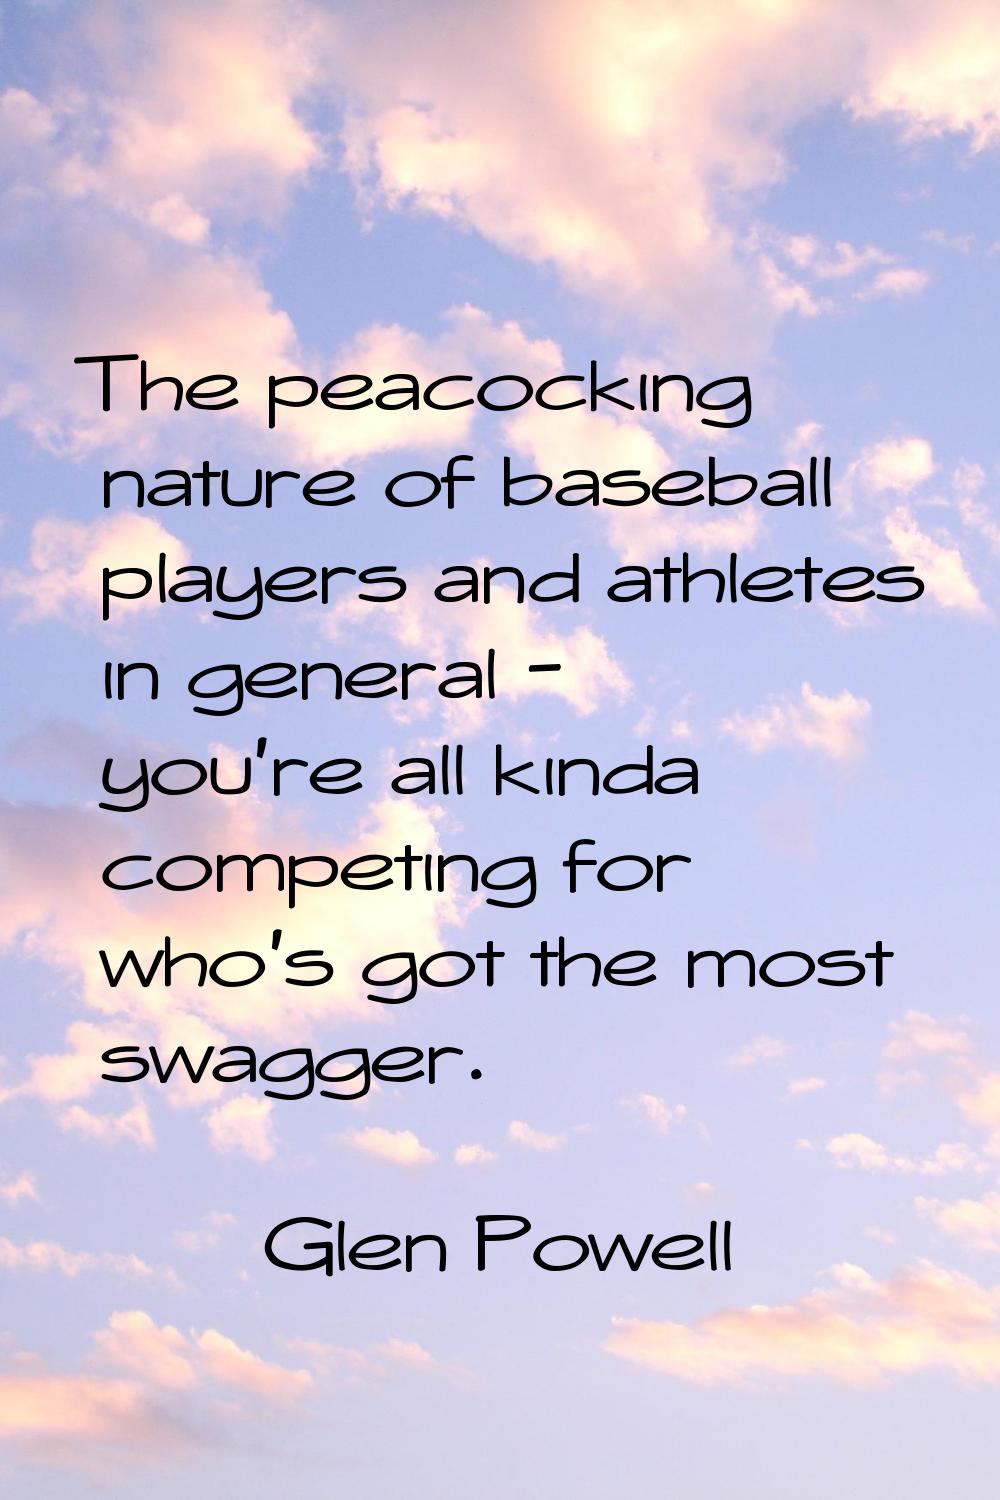 The peacocking nature of baseball players and athletes in general - you're all kinda competing for 